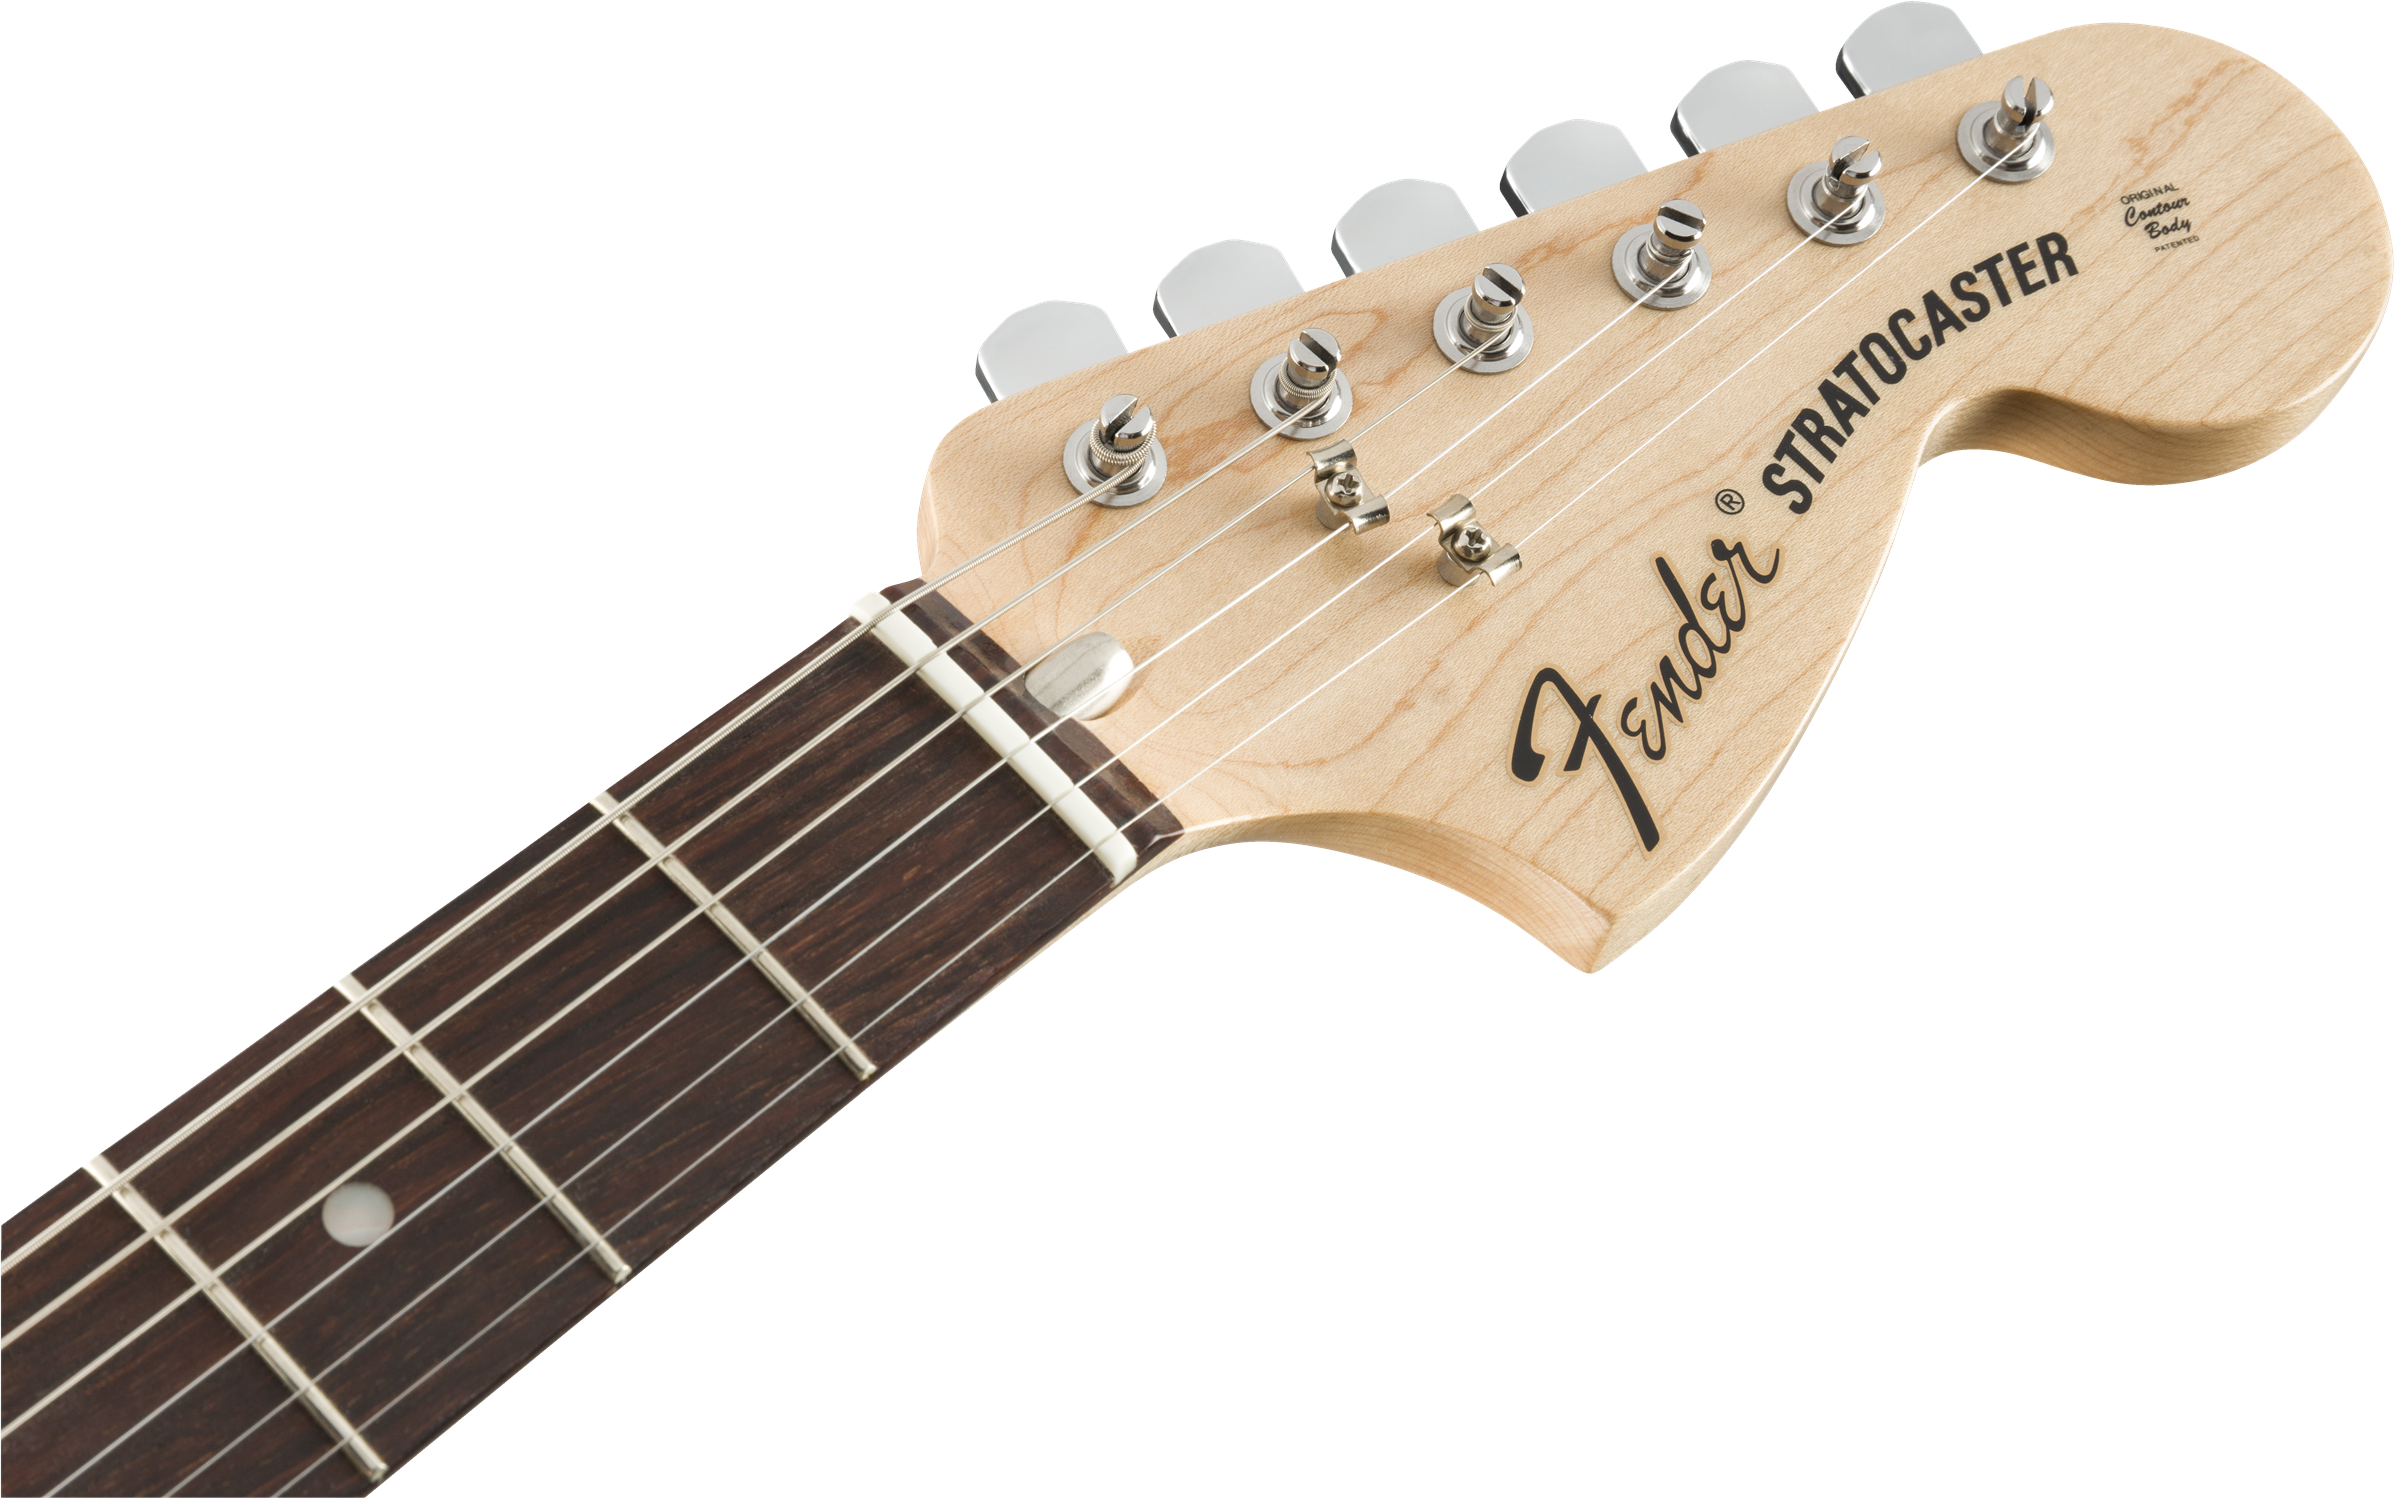 Fender Albert Hammond Jr. Signature Stratocaster Rosewood Fingerboard Olympic White 0146810305 SERIAL NUMBER MX22146237 - 7.8 LBS